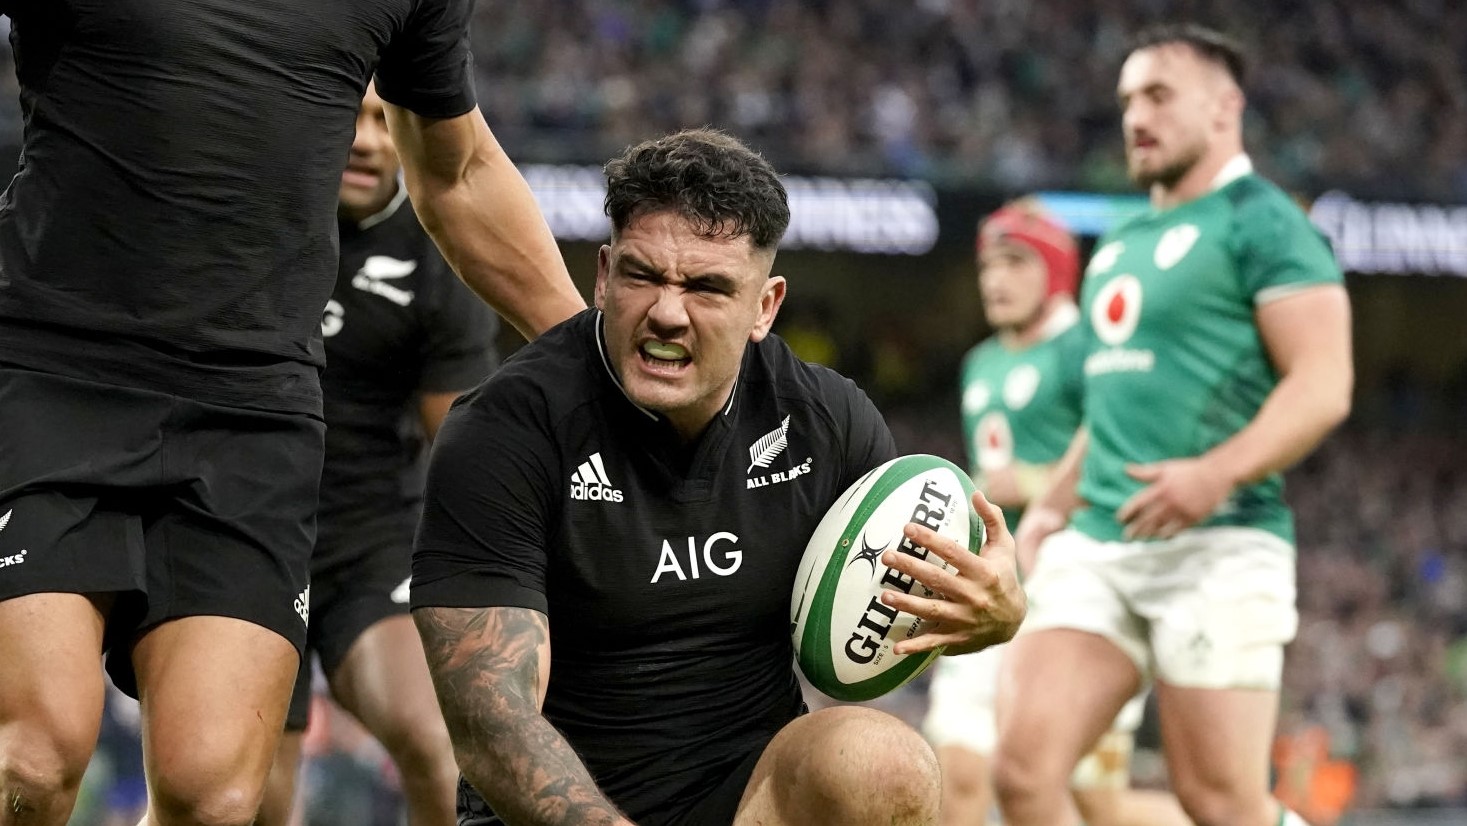 New Zealand's Codie Taylor celebrates scoring his sides first try during the Autumn International match at Aviva Stadium, Dublin. Picture date: Saturday November 13, 2021. (Photo by Niall Carson/PA Images via Getty Images)